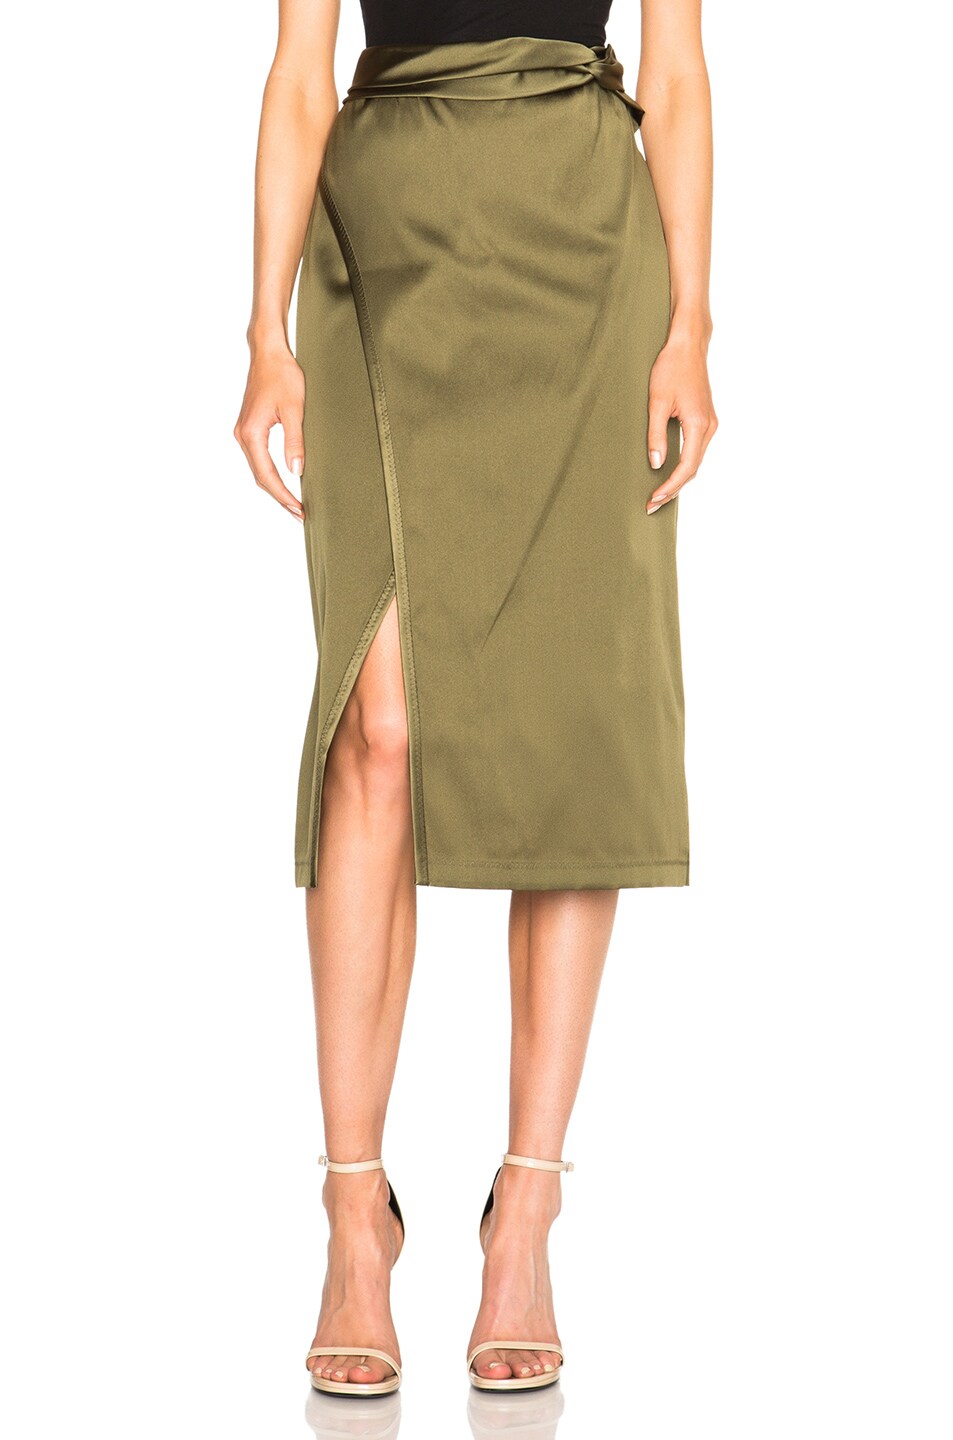 Image 1 of 3.1 phillip lim Satin Knotted Waistband Skirt in Everglade